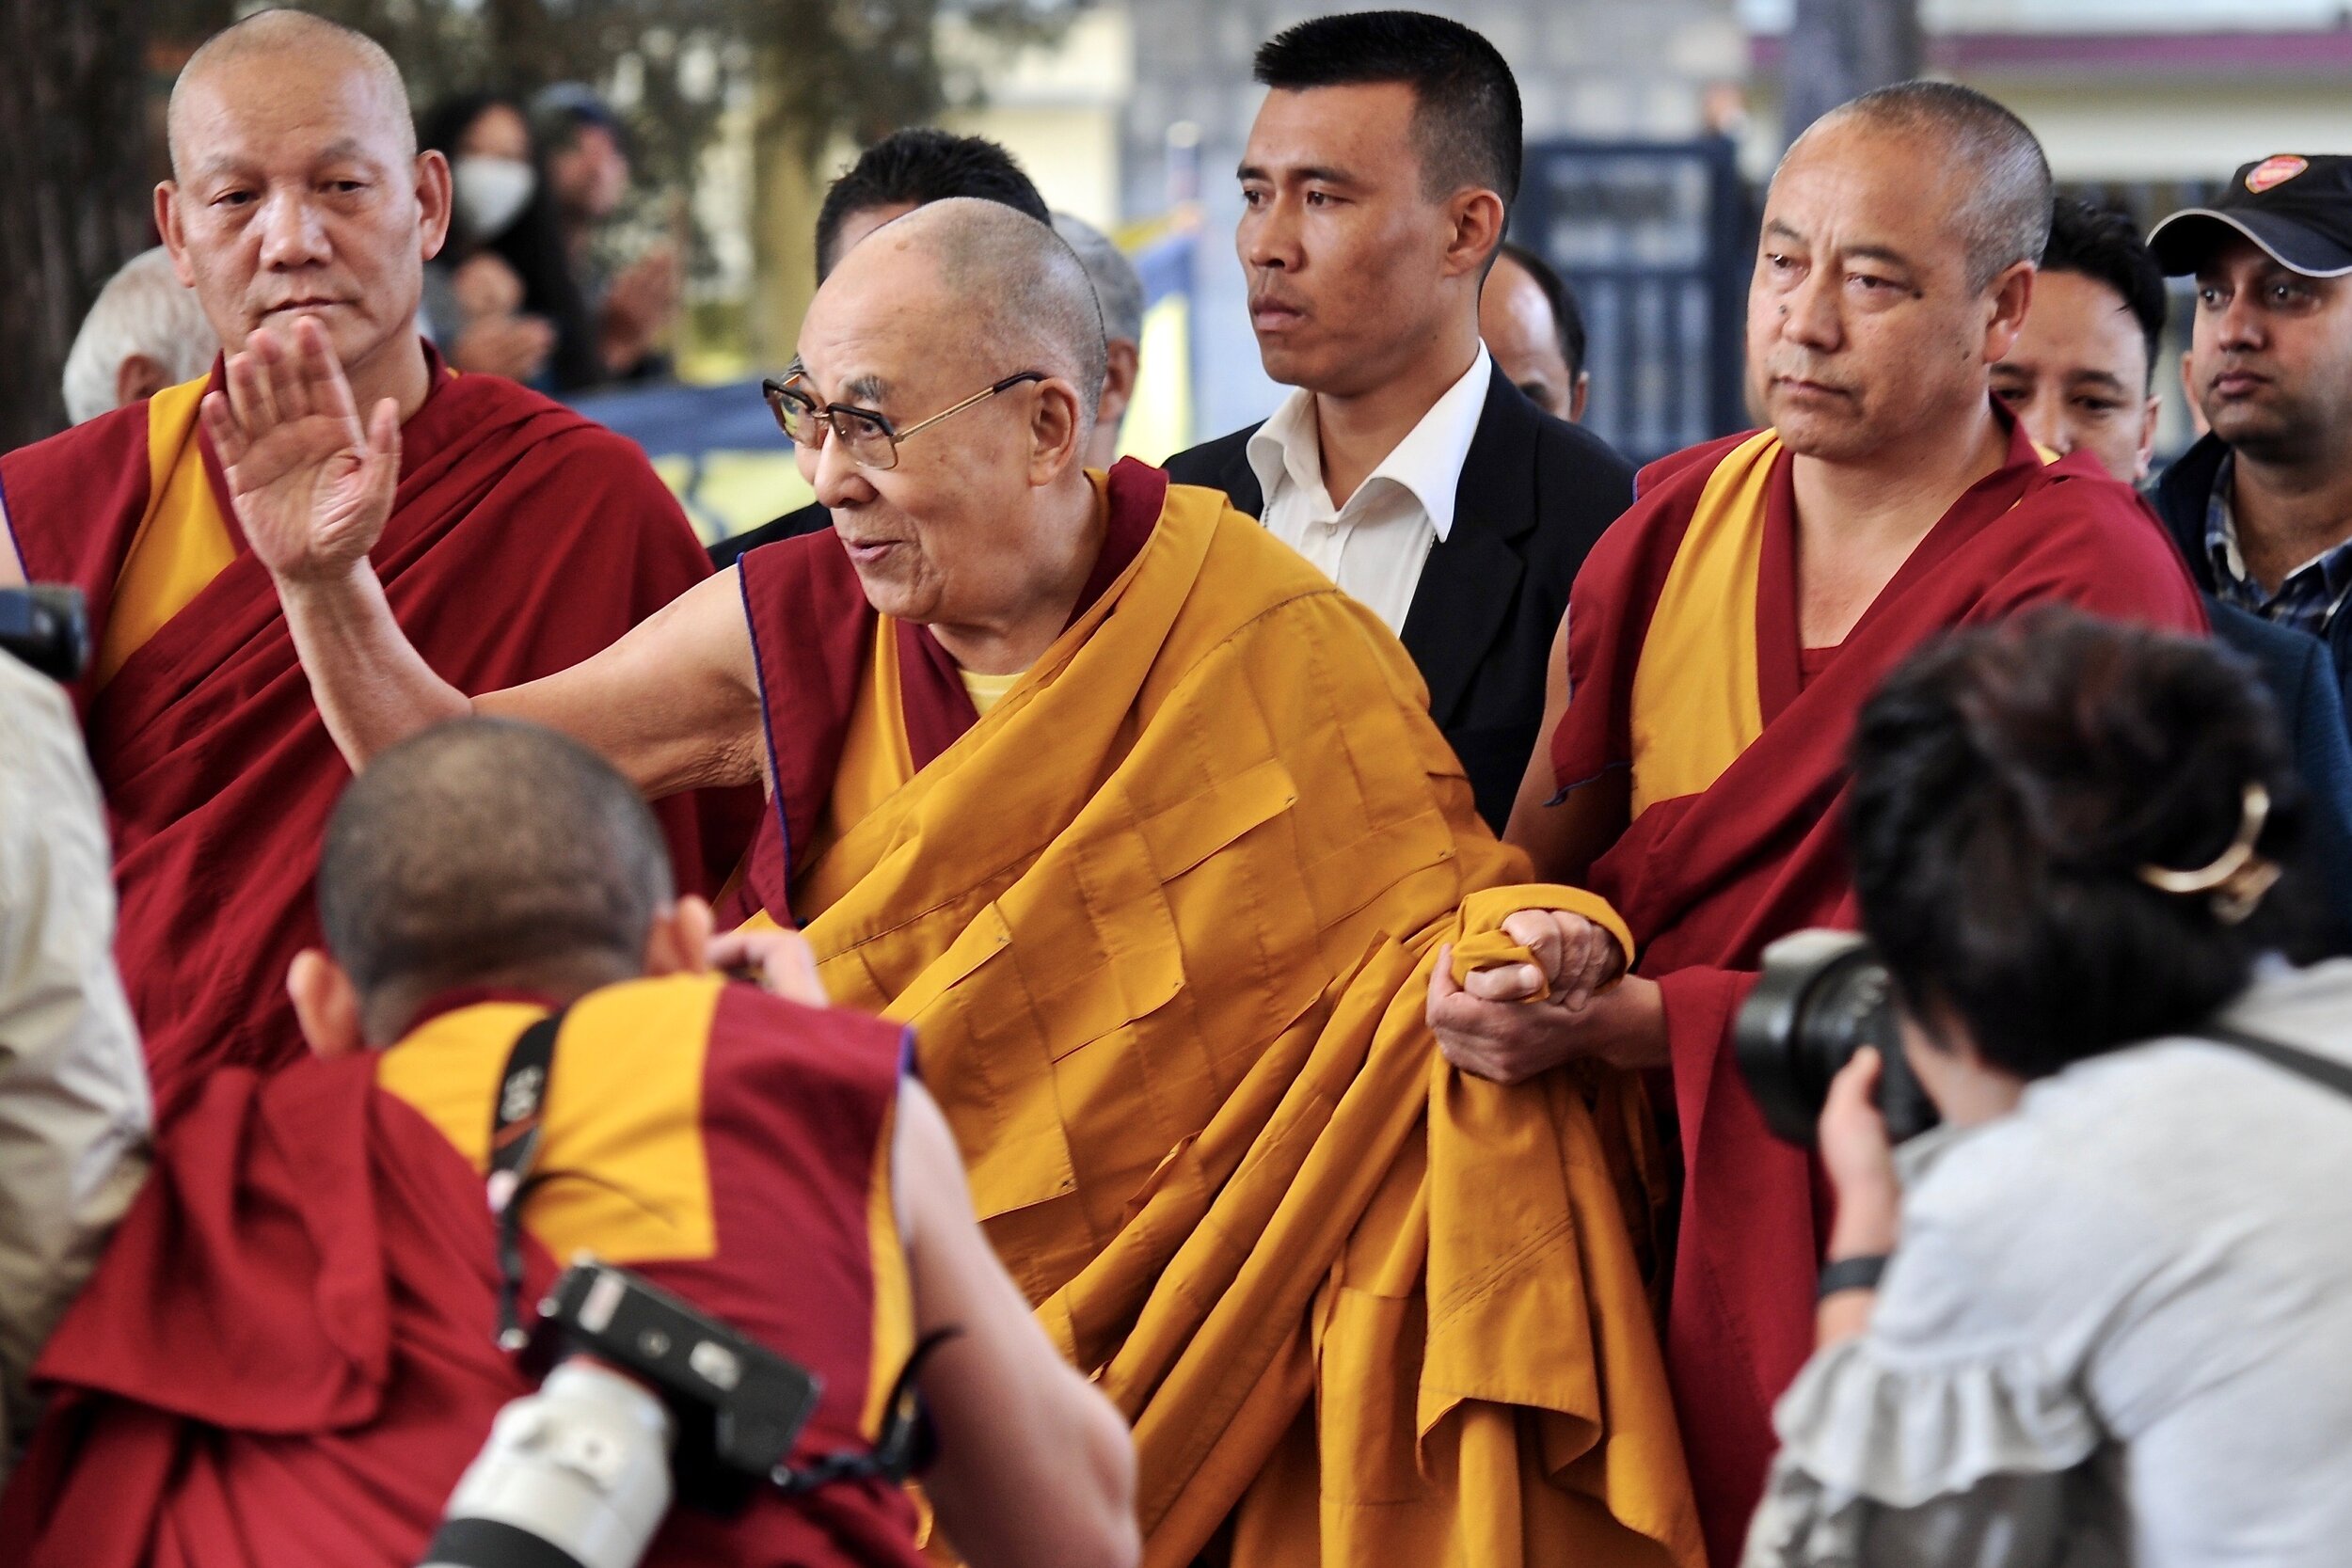  November 4 - 6, 2019 Dharamsala  His Holiness gave three days of teachings on The Heart Sutra (sherab nyingpo) in the mornings at the Main Tibetan Temple at the request of Koreans.   